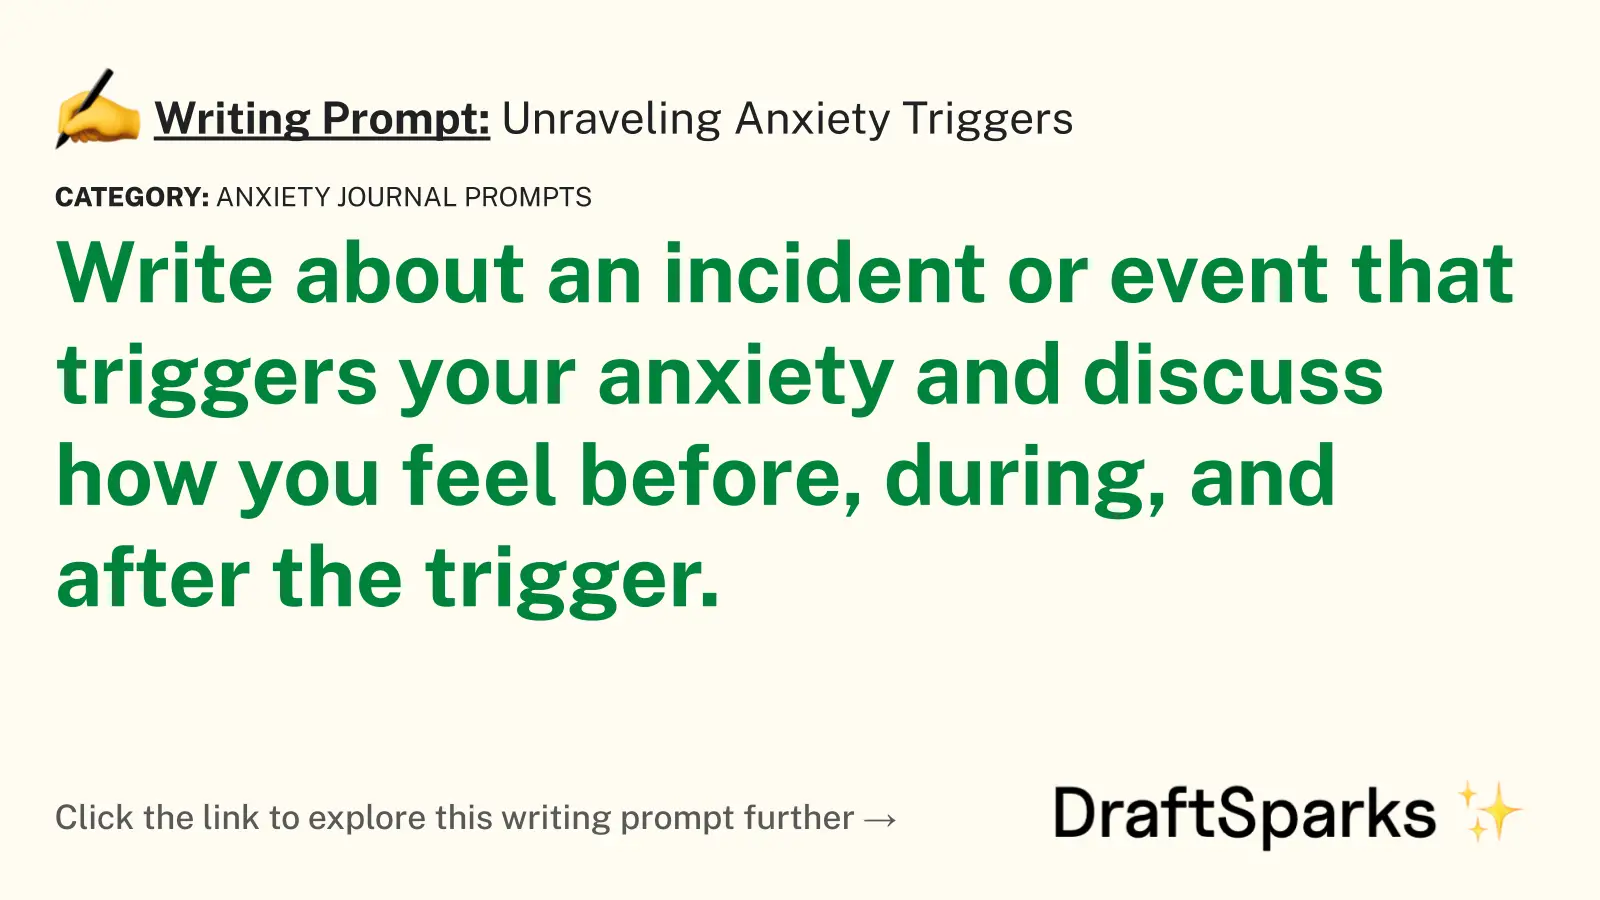 Unraveling Anxiety Triggers